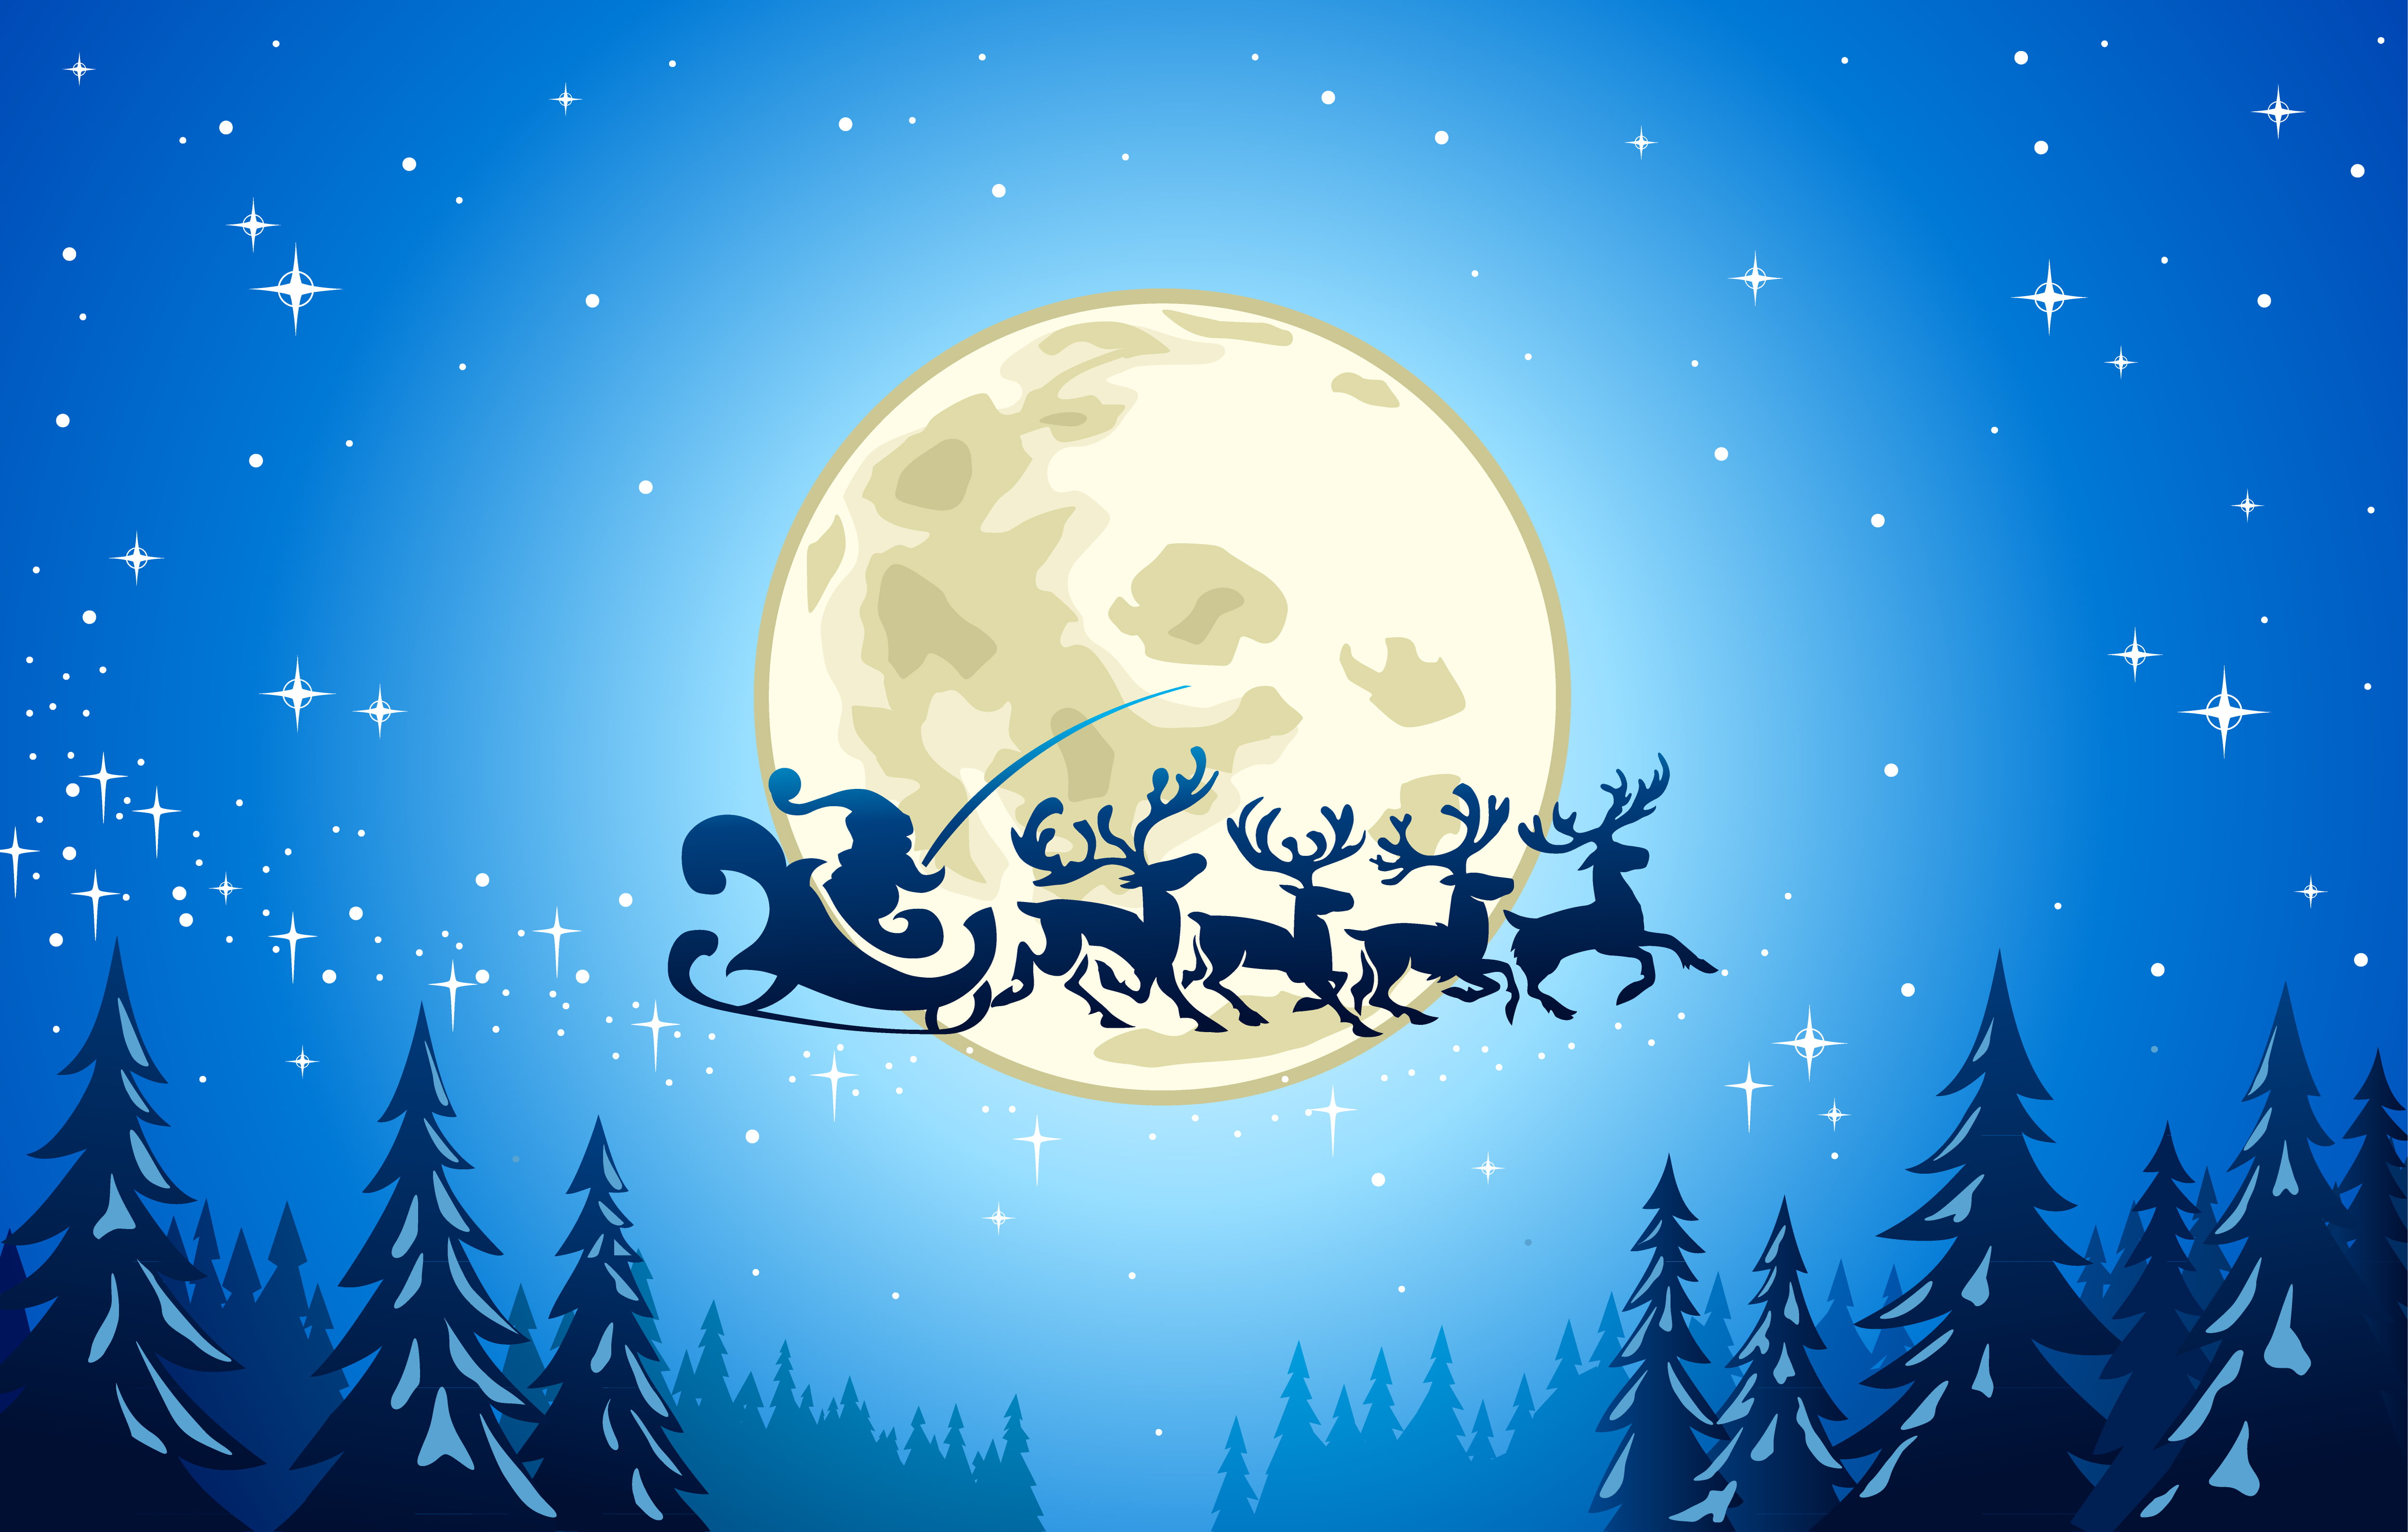 silhouette of sleight and four deer illustration, stars, snow